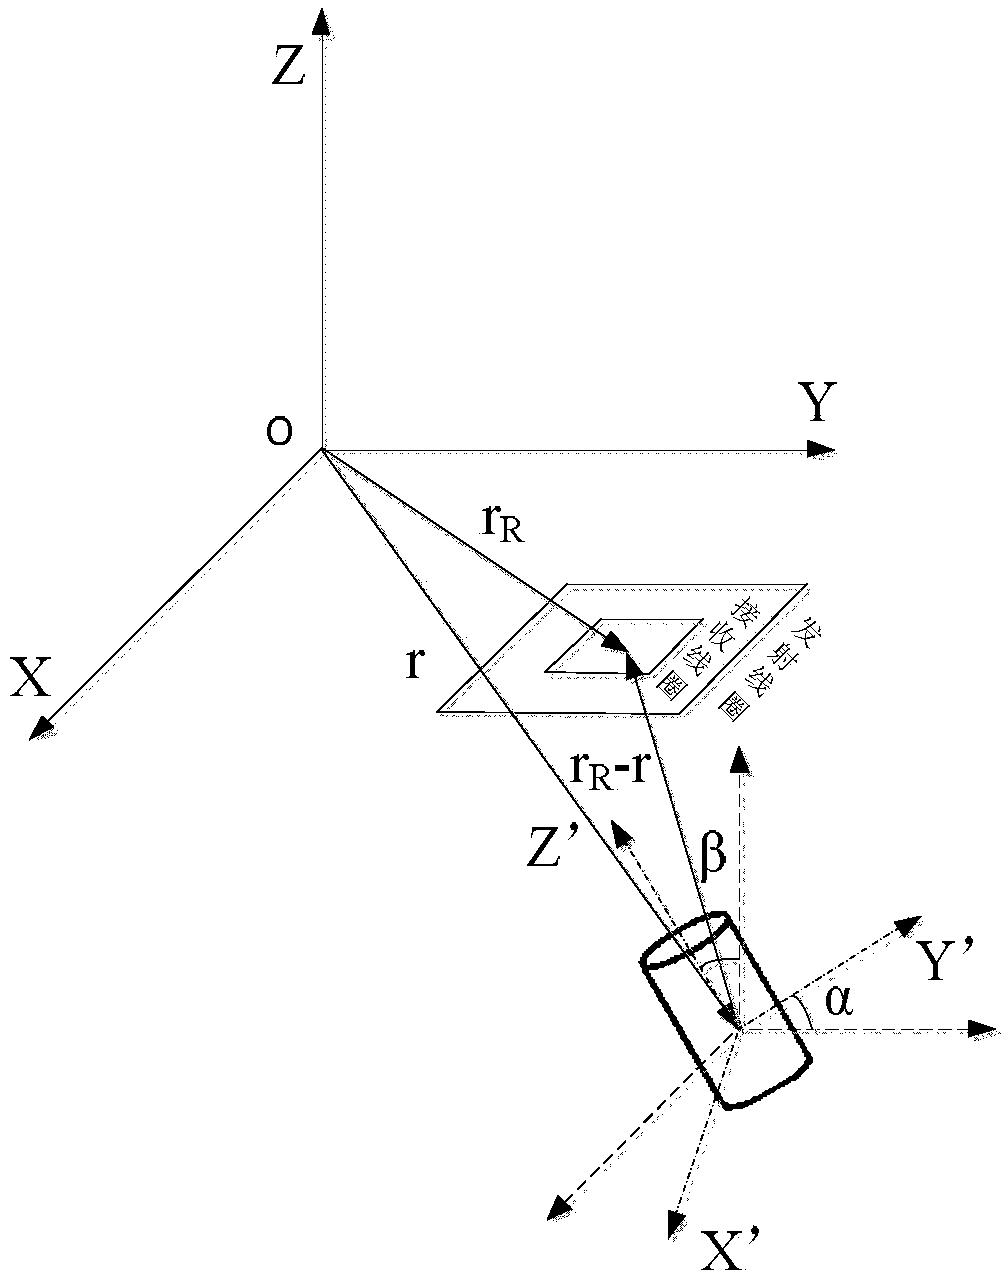 Underground target recognition method based on joint inversion